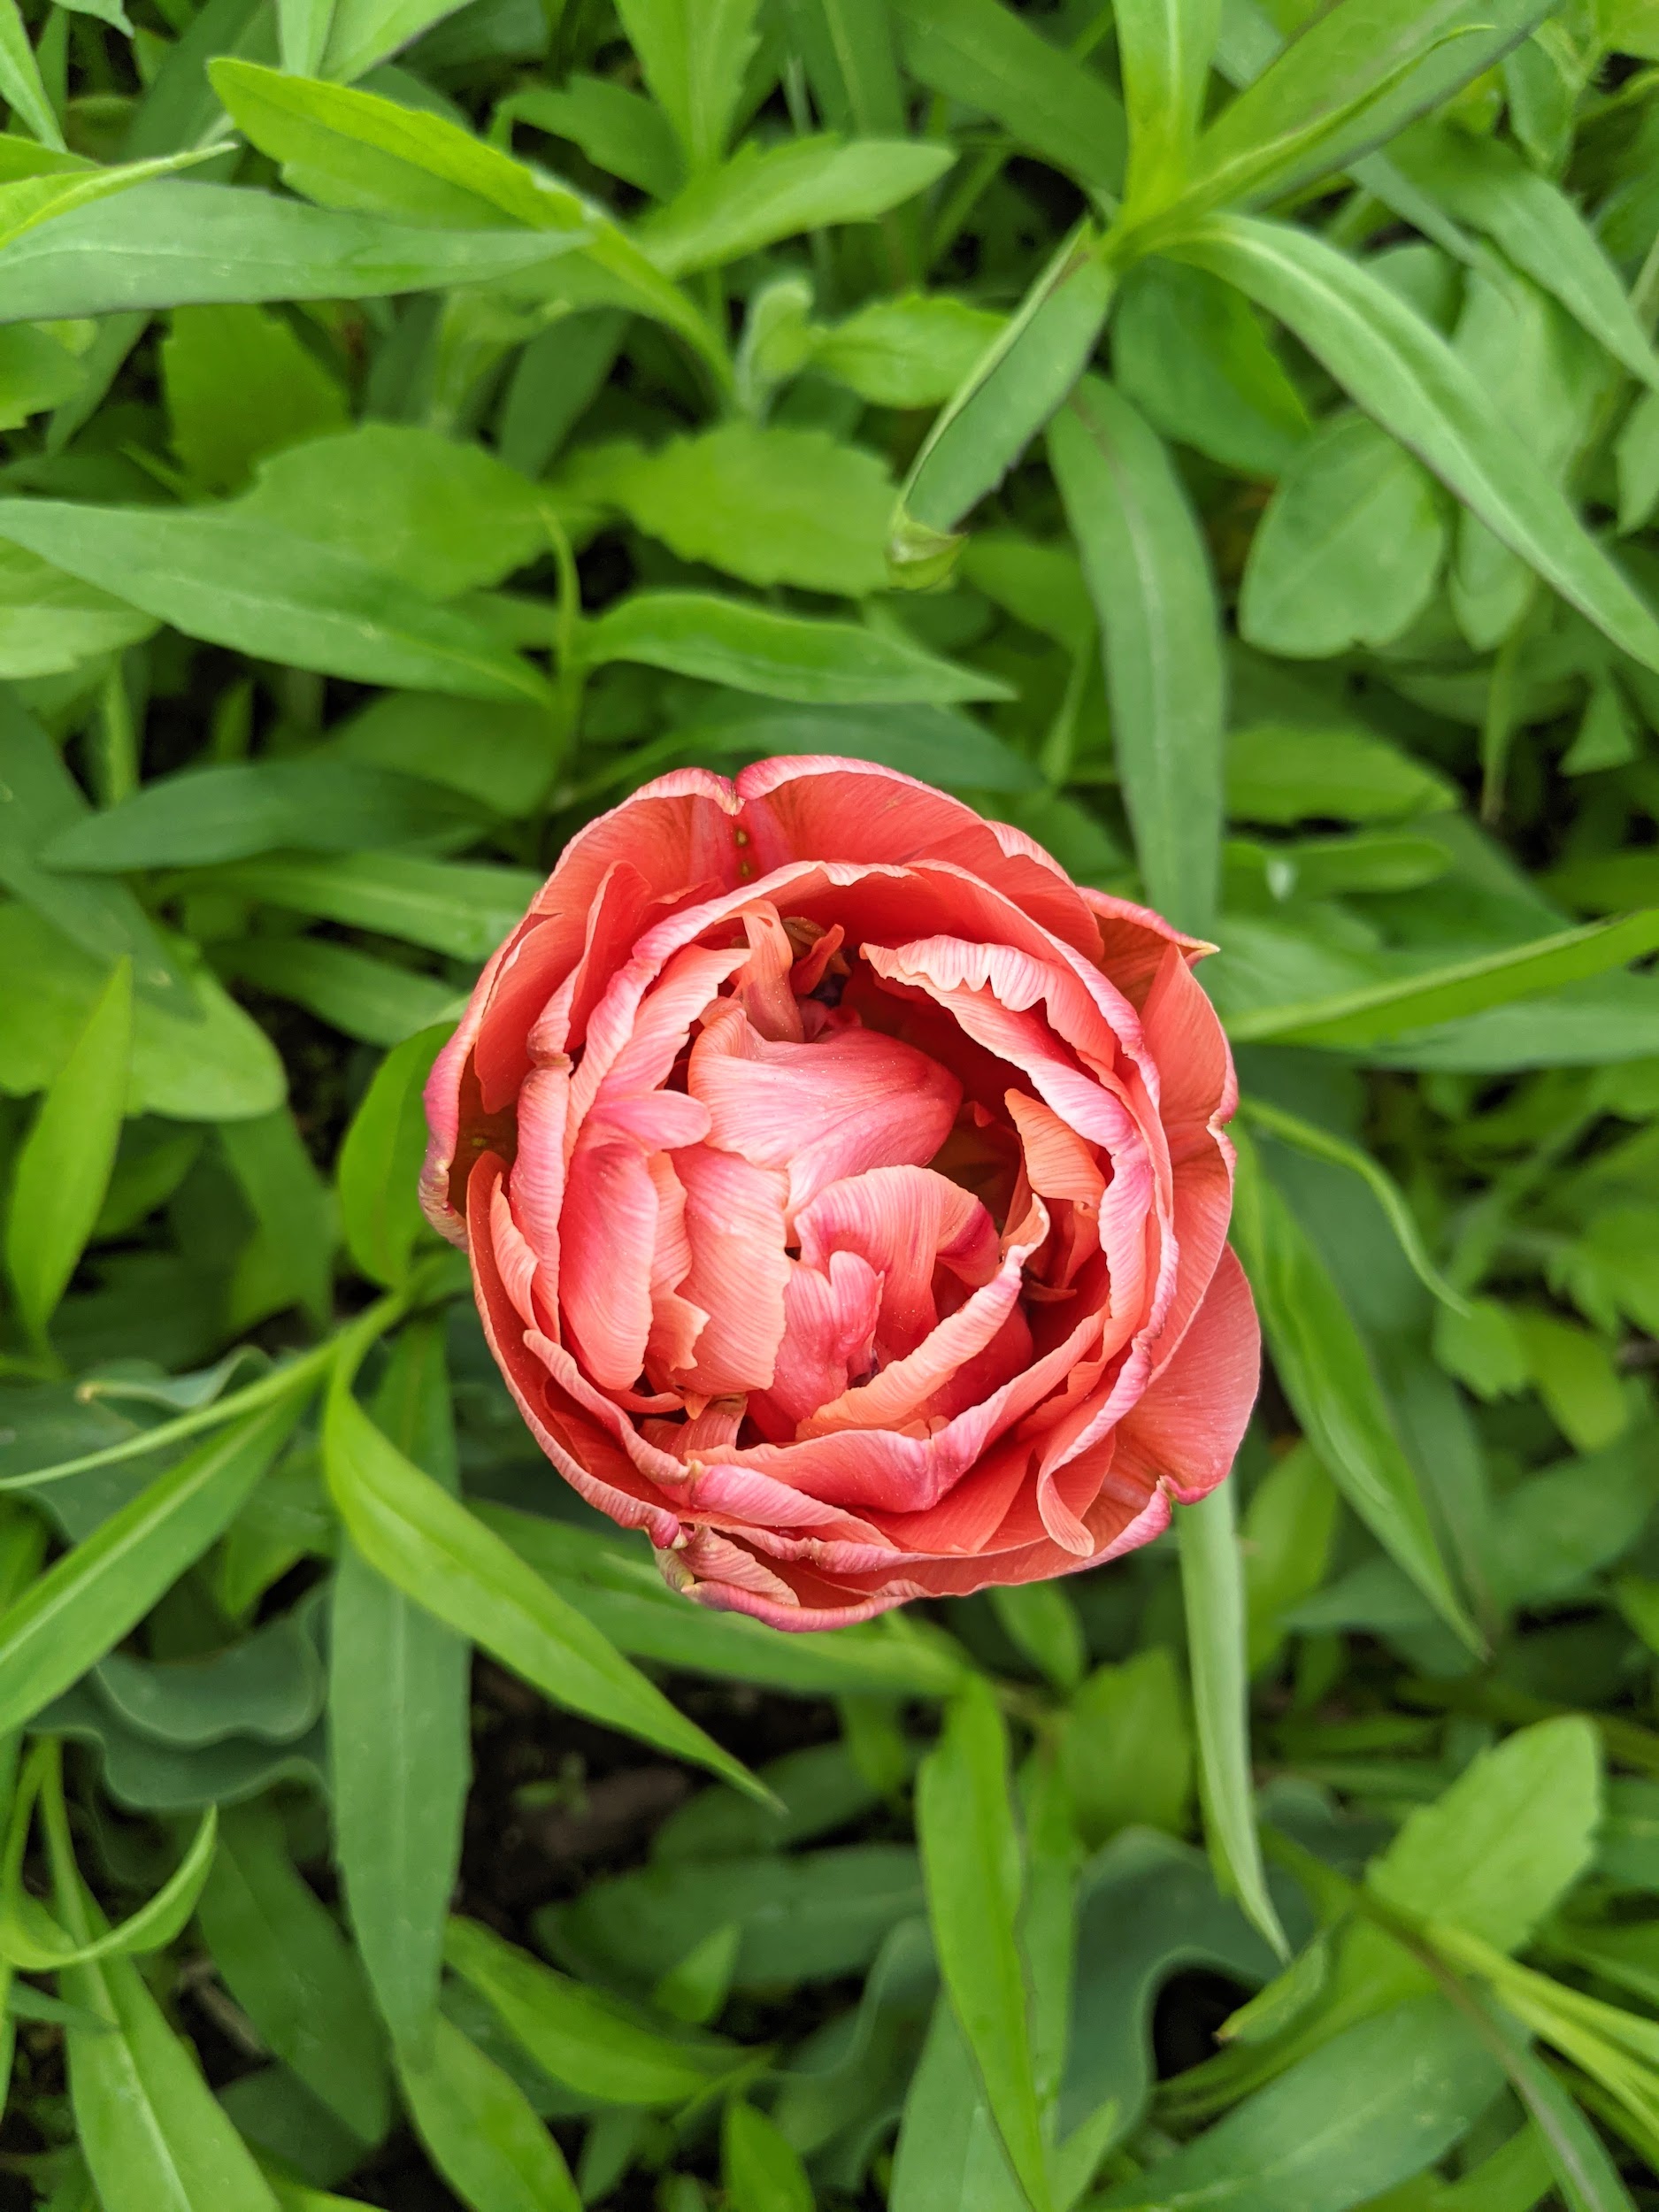 Cutting and Arranging Spring Tulips from the Garden - The Martha Stewart  Blog